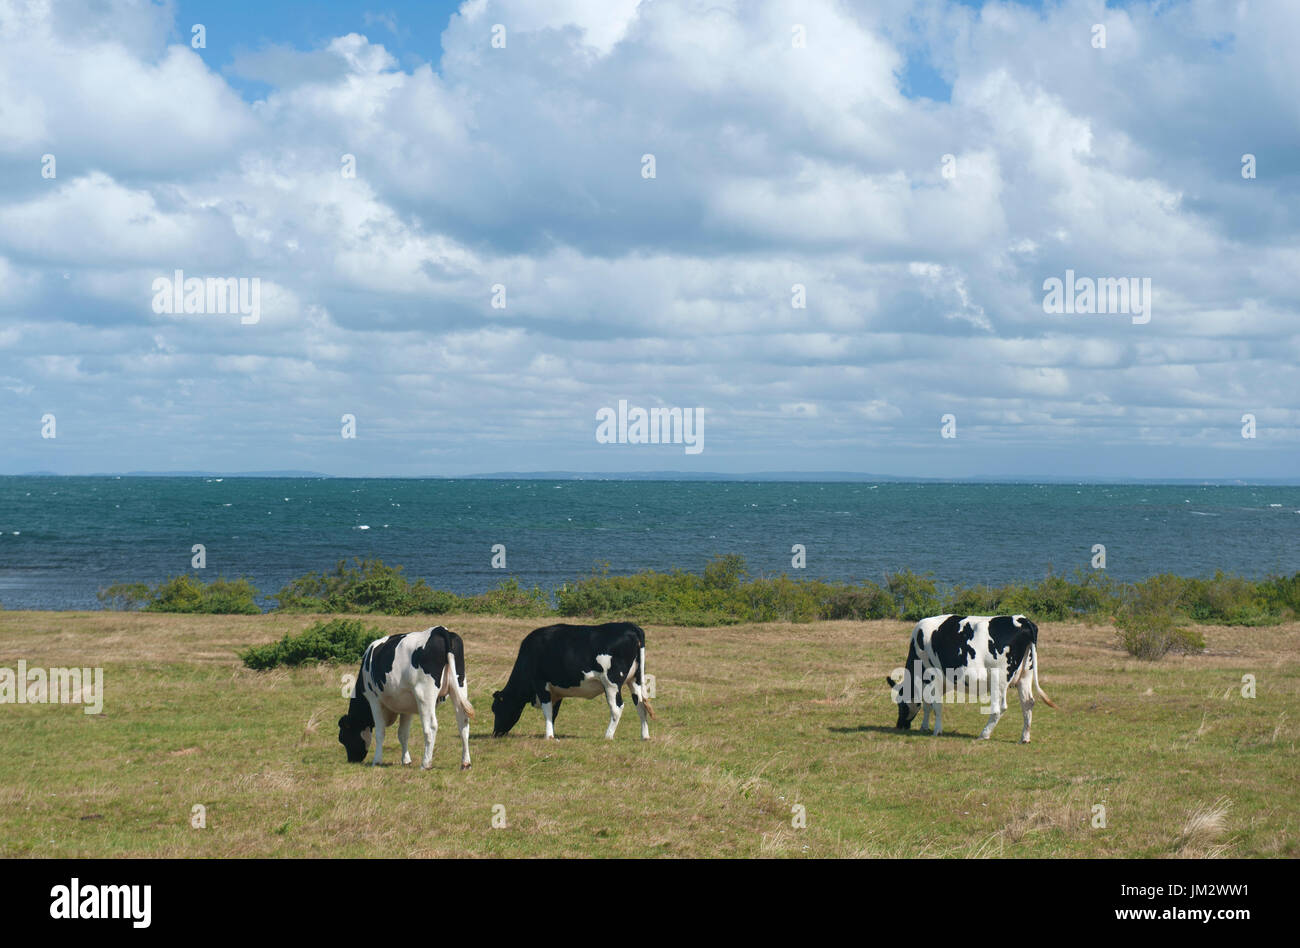 Cattle grazing by the sea, Skane, Sweden Stock Photo